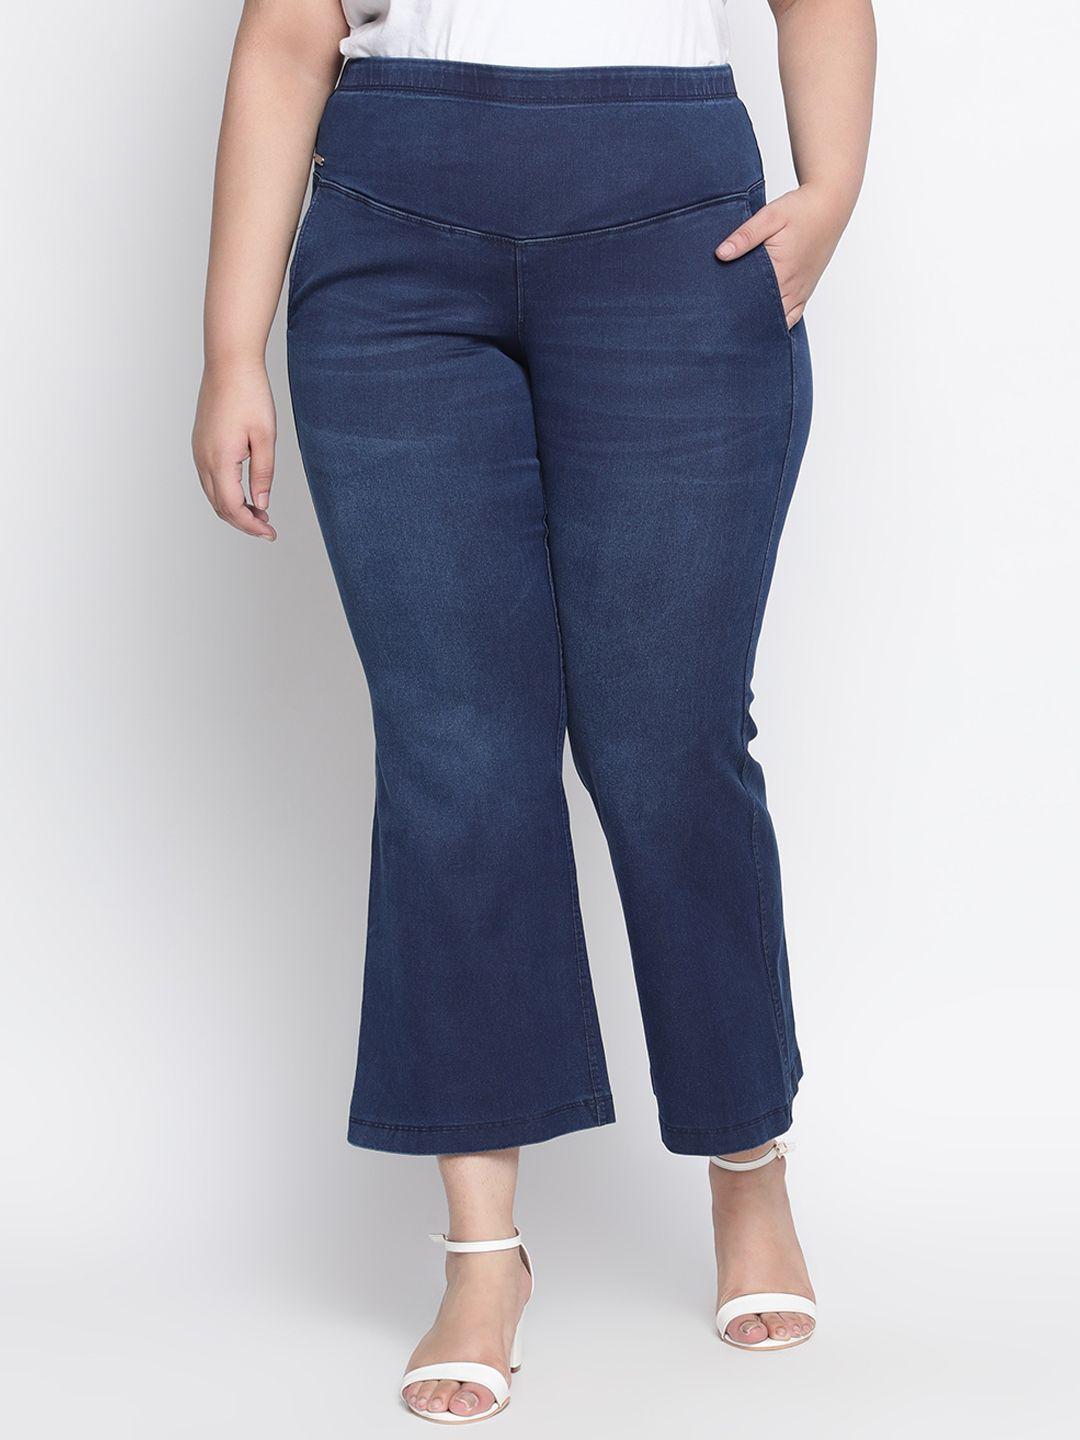 amydus-women-plus-size-flared-high-rise-stretchable-jeans